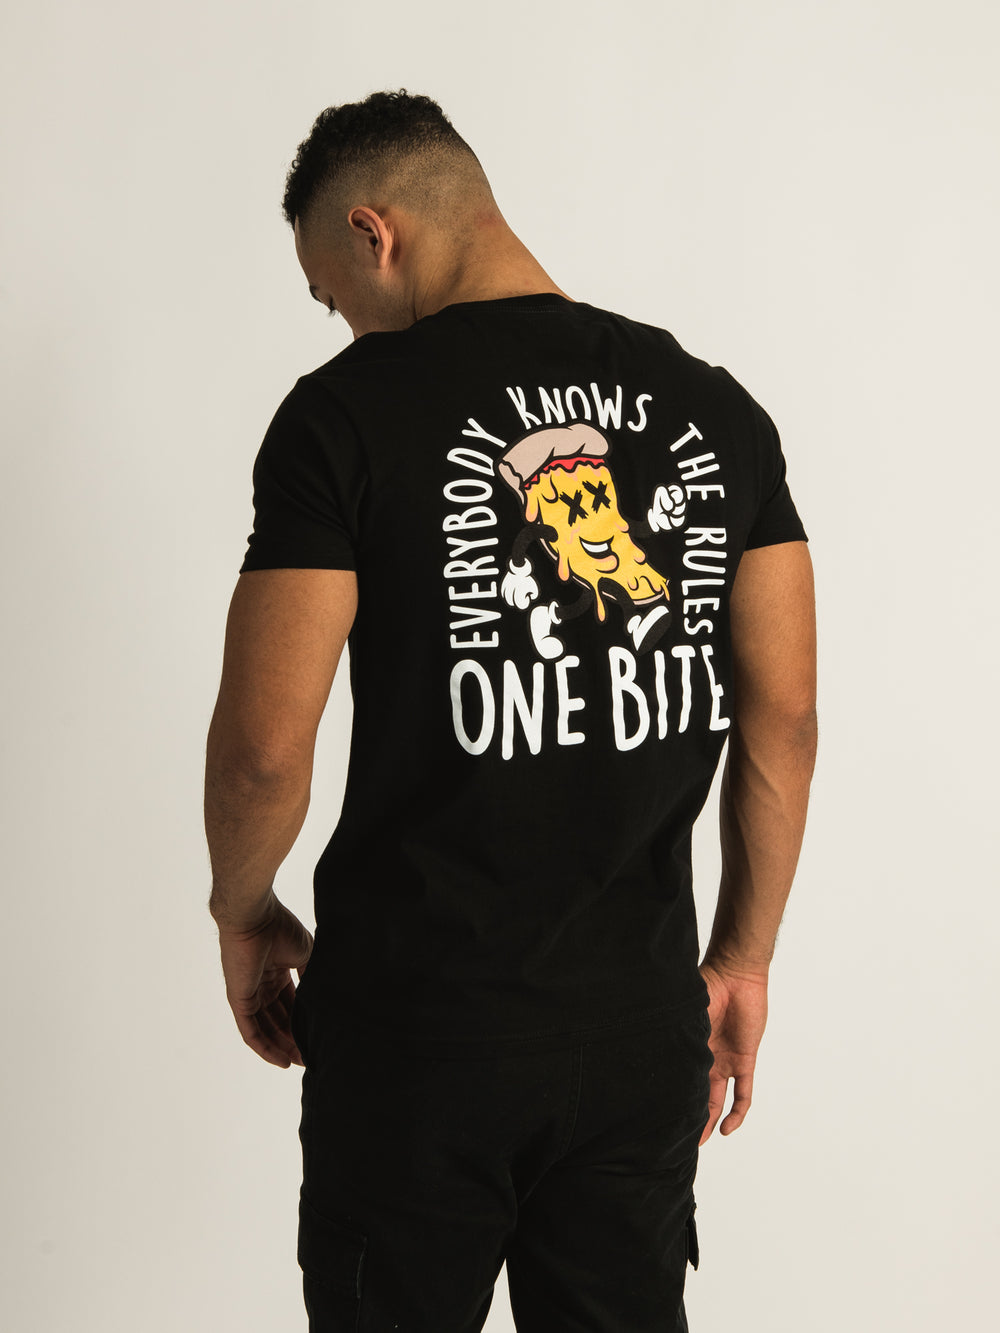  BARSTOOL SPORTS T-SHIRT ONE BITE EVERYBODY KNOWS THE RULES